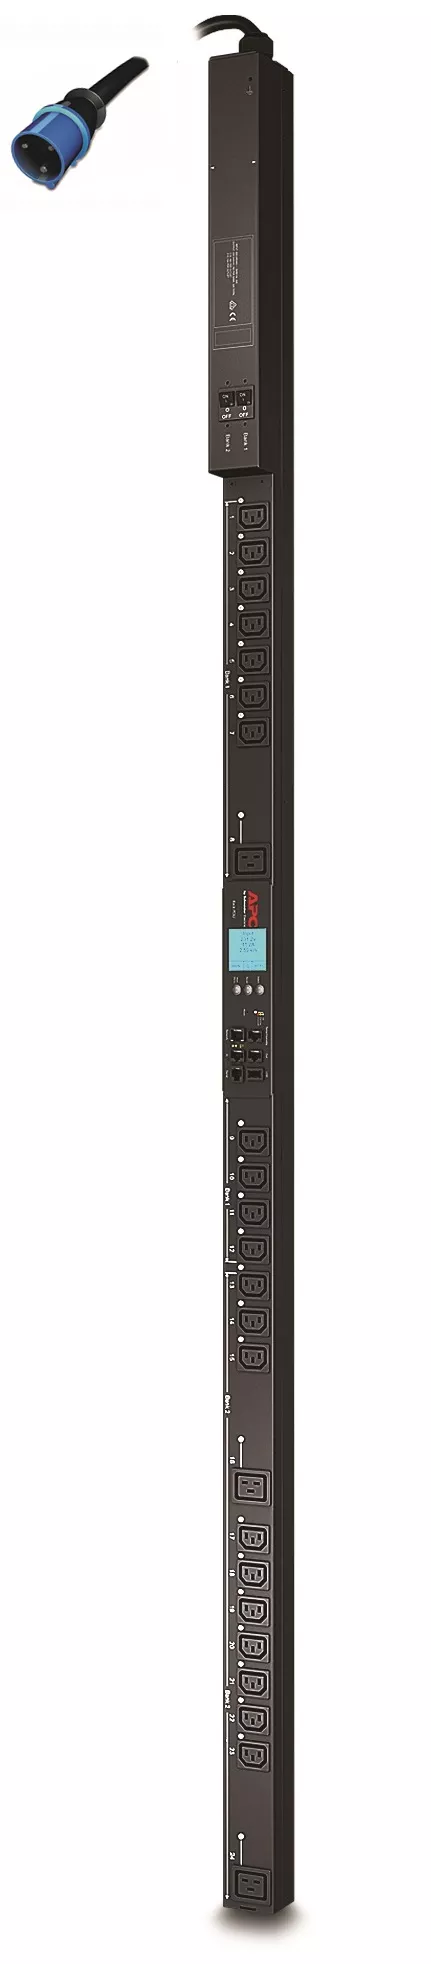 Achat APC Rack PDU 2G, Metered by Outlet with Switching, ZeroU au meilleur prix